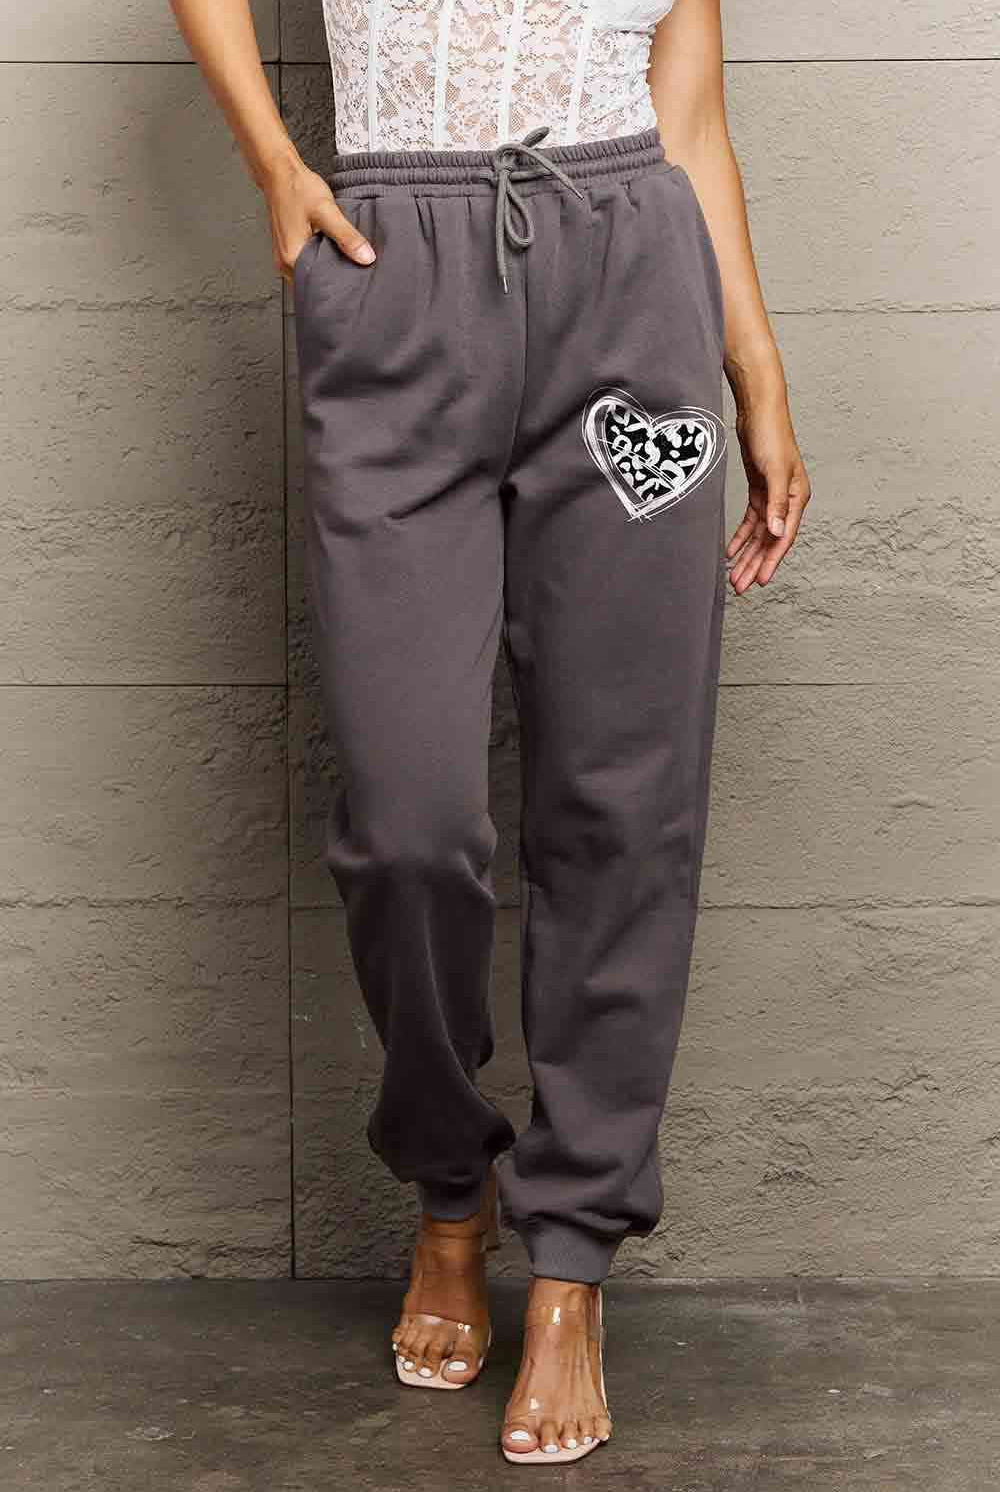 Simply Love Simply Love Full Size Drawstring Heart Graphic Long Sweatpants - GemThreads Boutique